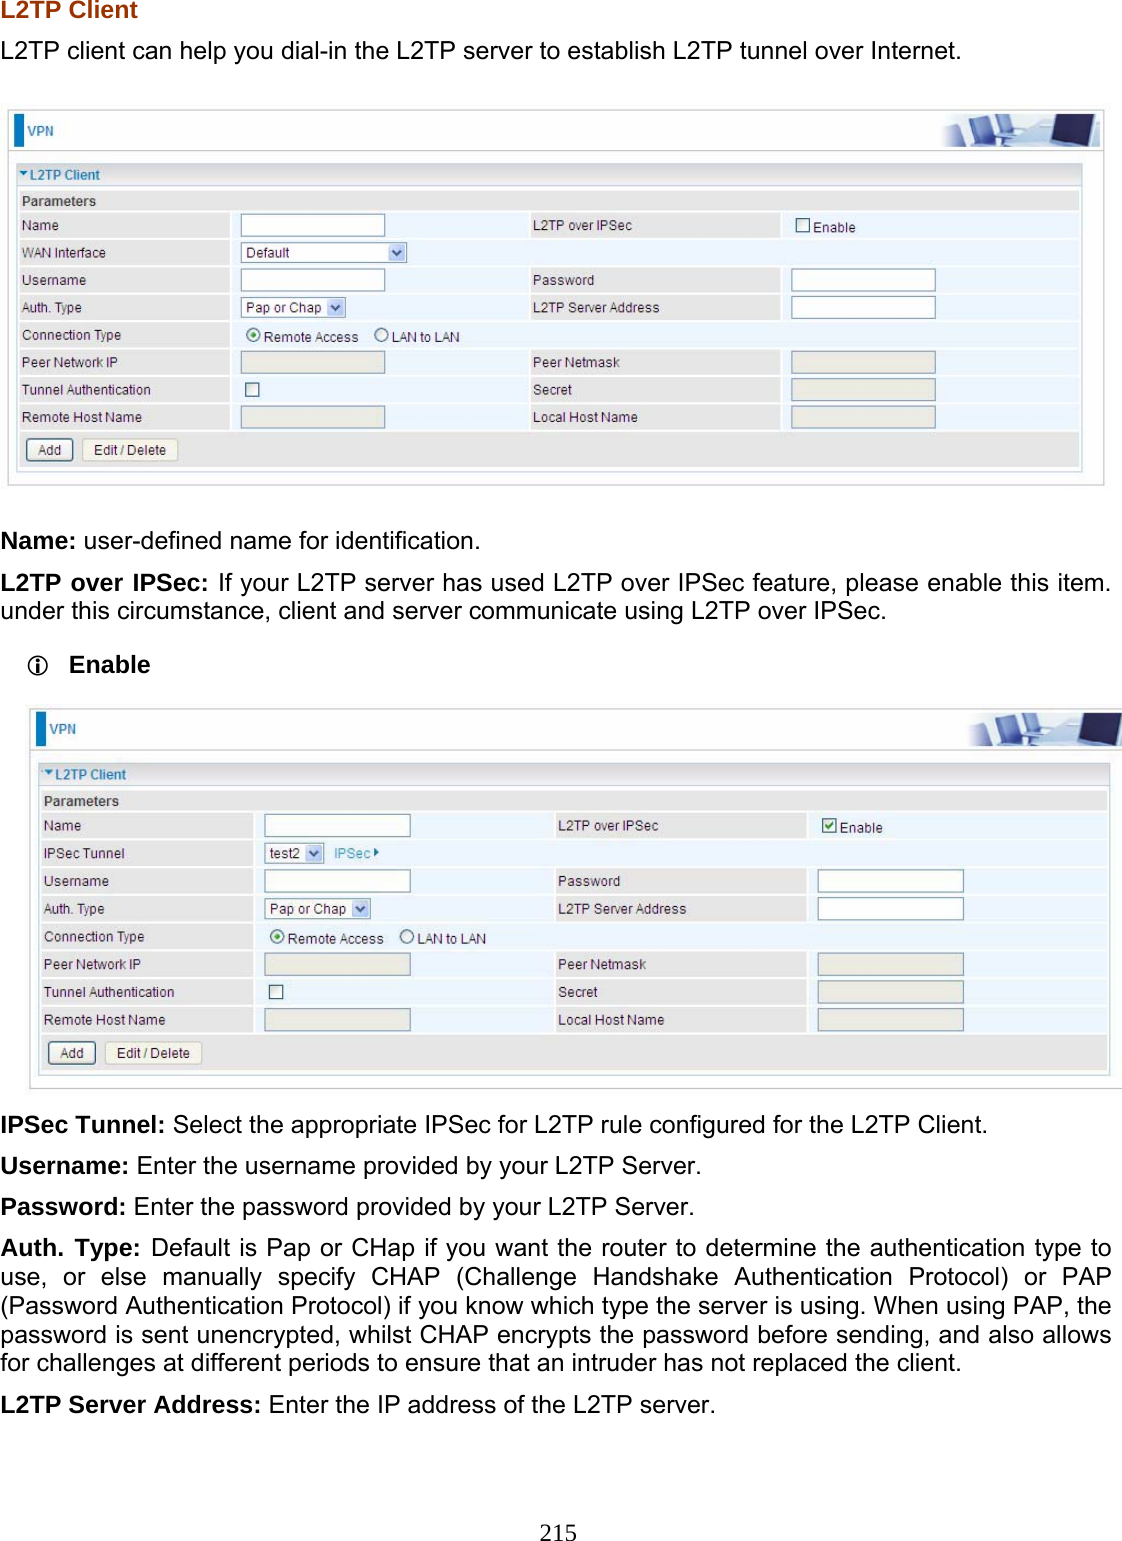 215 L2TP Client L2TP client can help you dial-in the L2TP server to establish L2TP tunnel over Internet.  Name: user-defined name for identification. L2TP over IPSec: If your L2TP server has used L2TP over IPSec feature, please enable this item. under this circumstance, client and server communicate using L2TP over IPSec.  Enable  IPSec Tunnel: Select the appropriate IPSec for L2TP rule configured for the L2TP Client.  Username: Enter the username provided by your L2TP Server. Password: Enter the password provided by your L2TP Server.  Auth. Type: Default is Pap or CHap if you want the router to determine the authentication type to use, or else manually specify CHAP (Challenge Handshake Authentication Protocol) or PAP (Password Authentication Protocol) if you know which type the server is using. When using PAP, the password is sent unencrypted, whilst CHAP encrypts the password before sending, and also allows for challenges at different periods to ensure that an intruder has not replaced the client. L2TP Server Address: Enter the IP address of the L2TP server. 